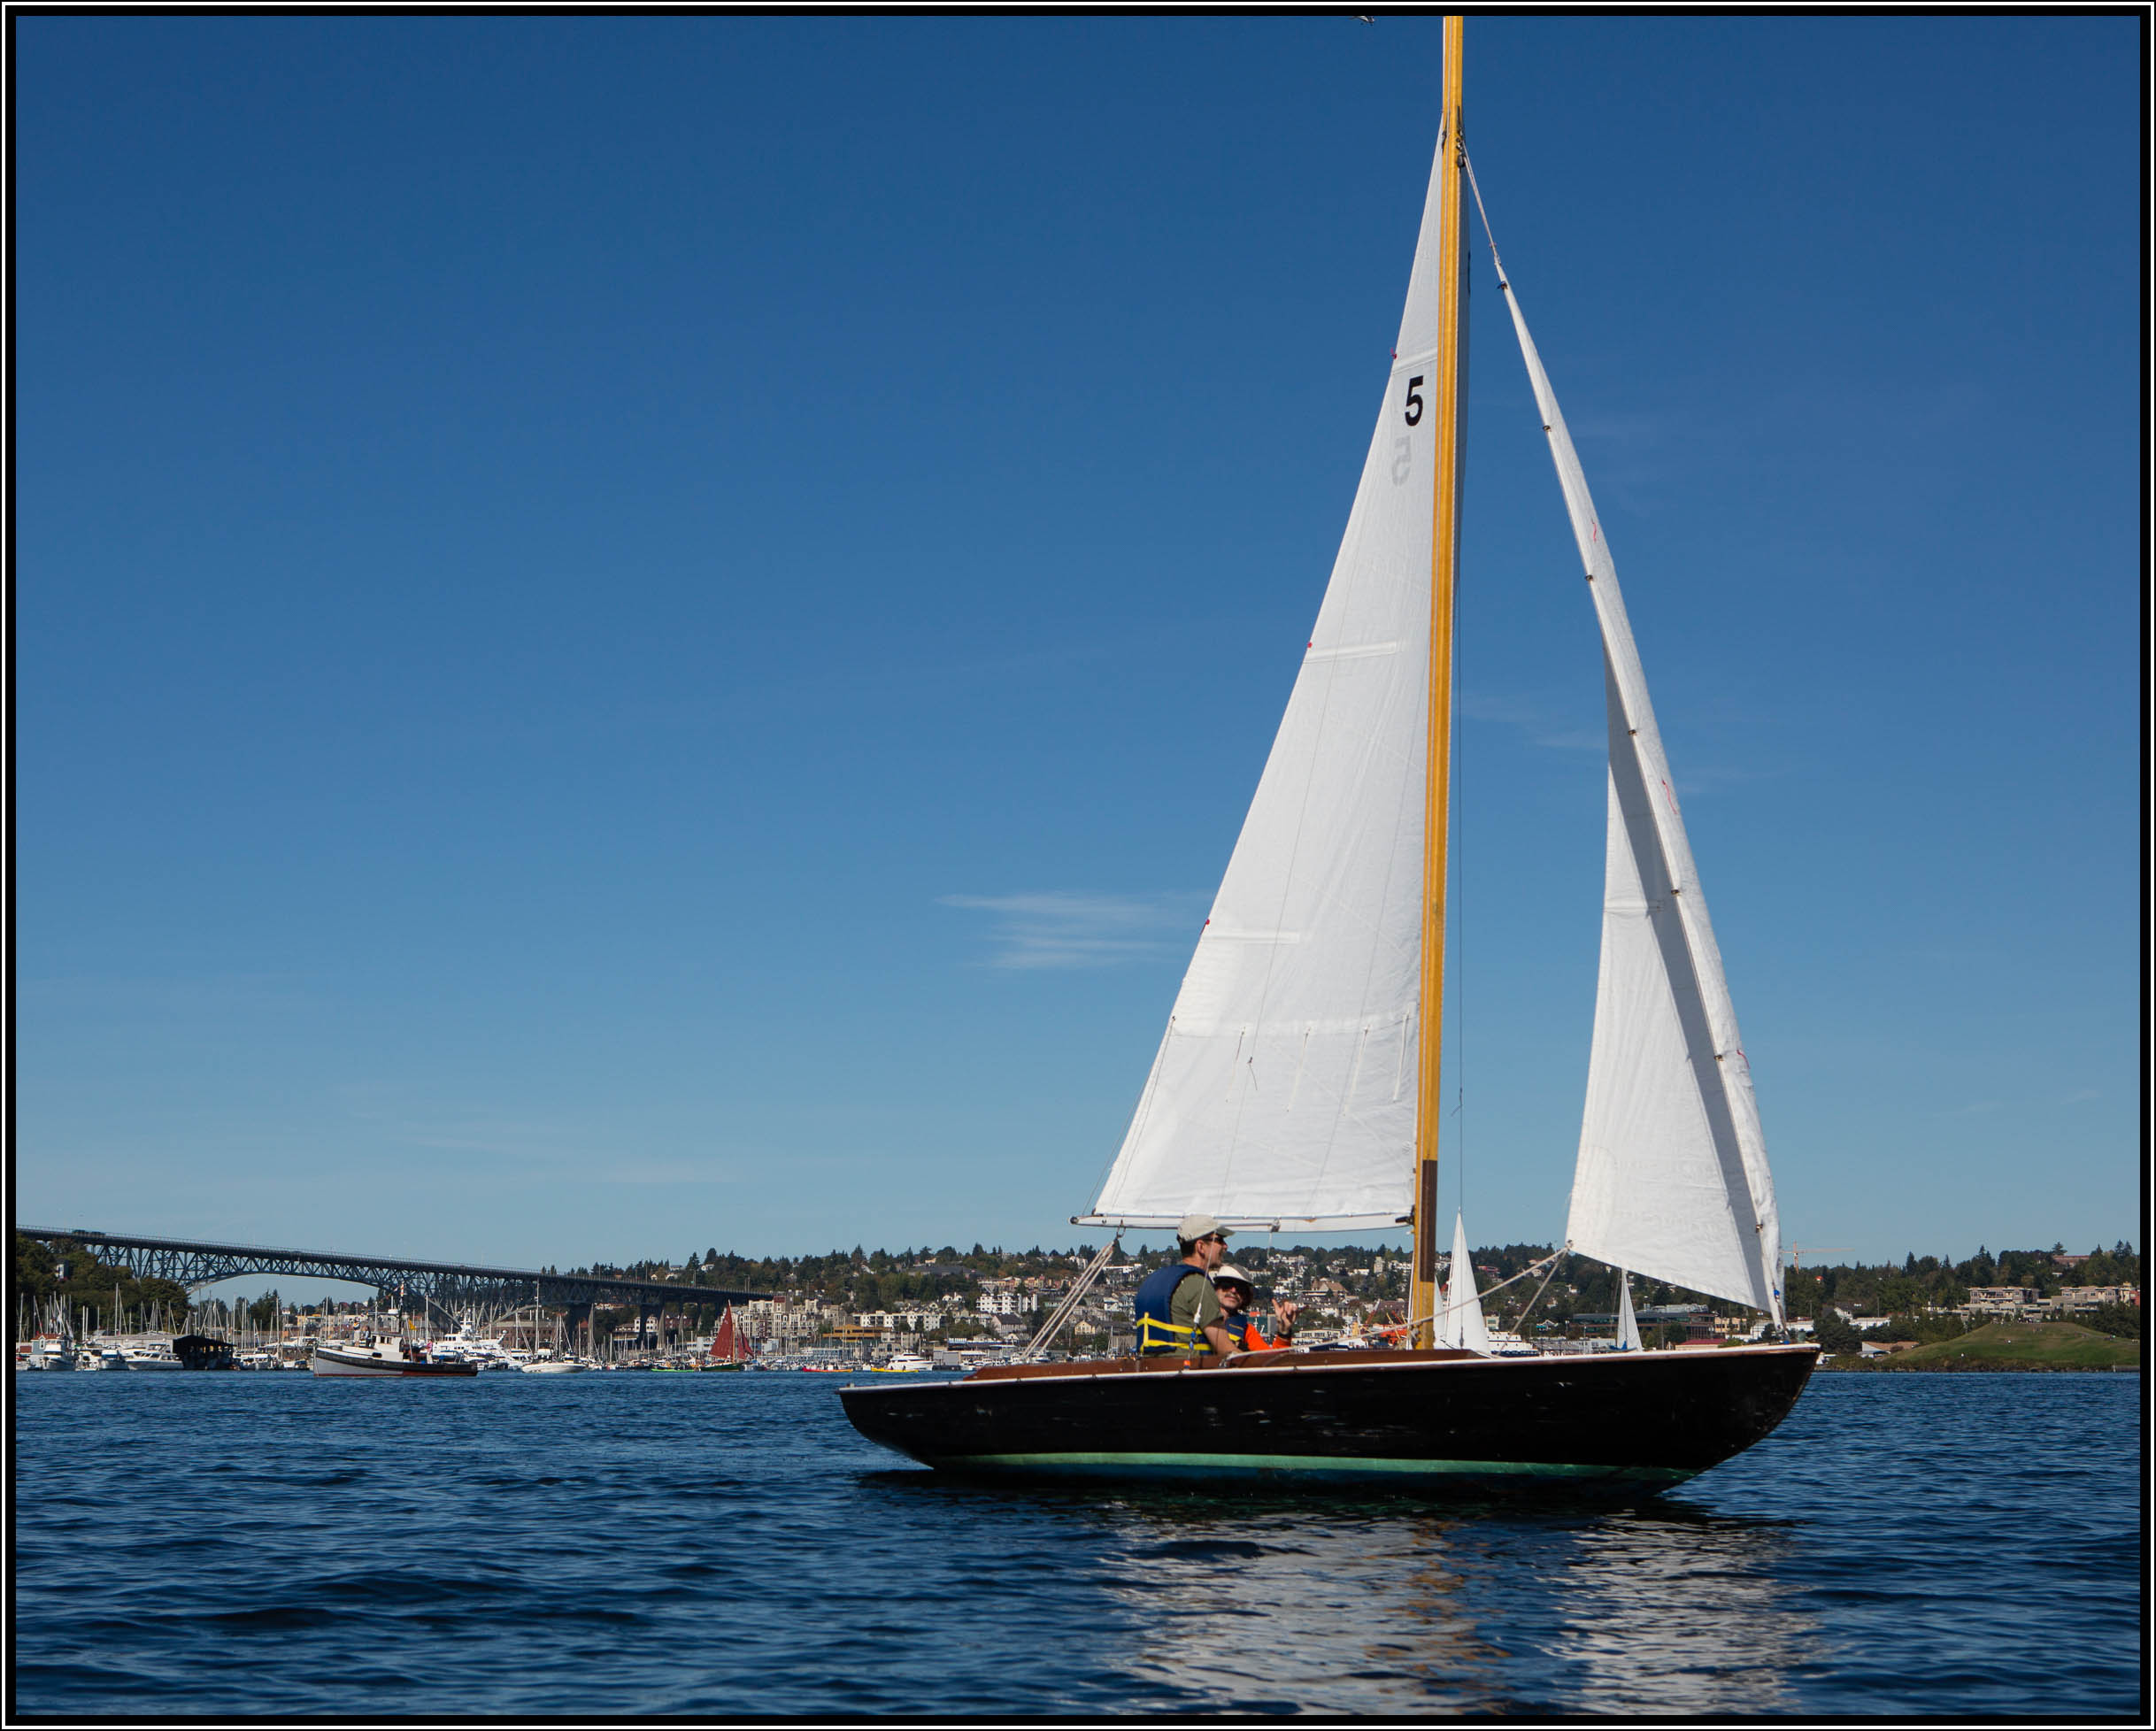 Adult Sailing — The Center for Wooden Boats